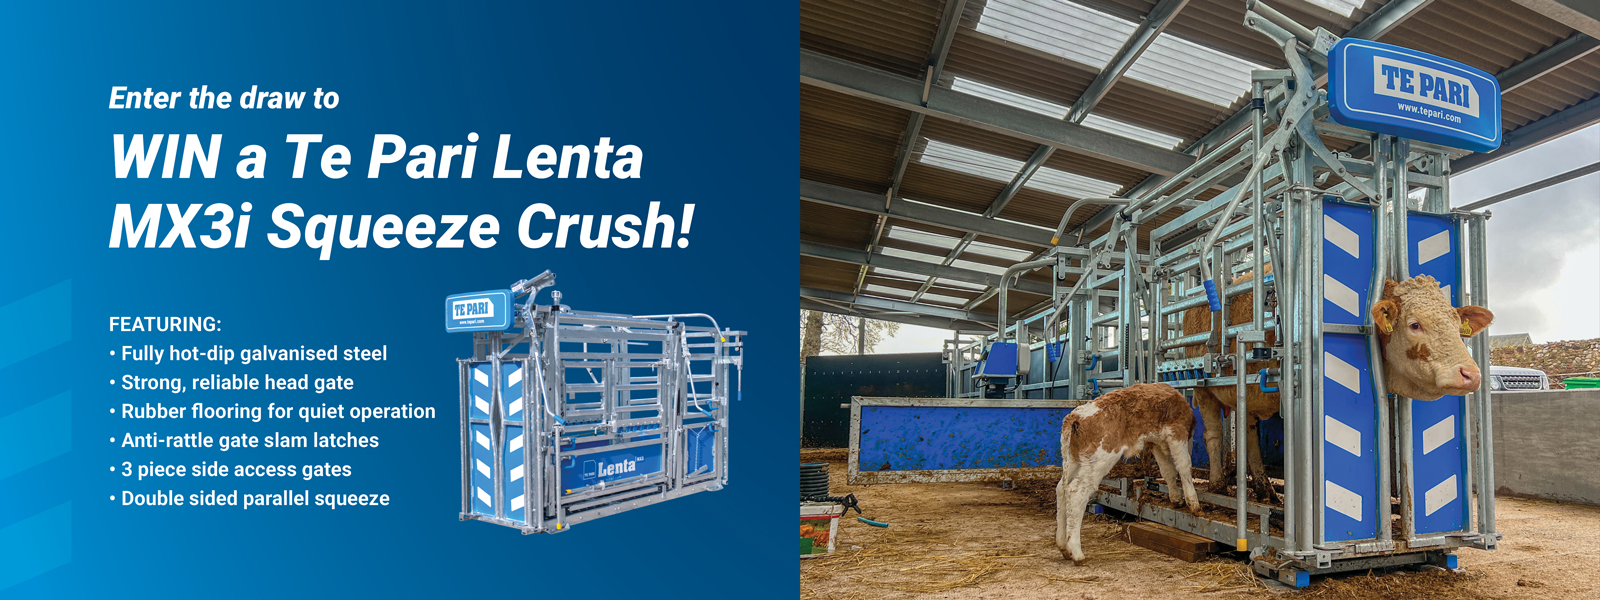 Cow in a crush with the following text. Win a Te Pari Lenta MX3i Squeeze Crush